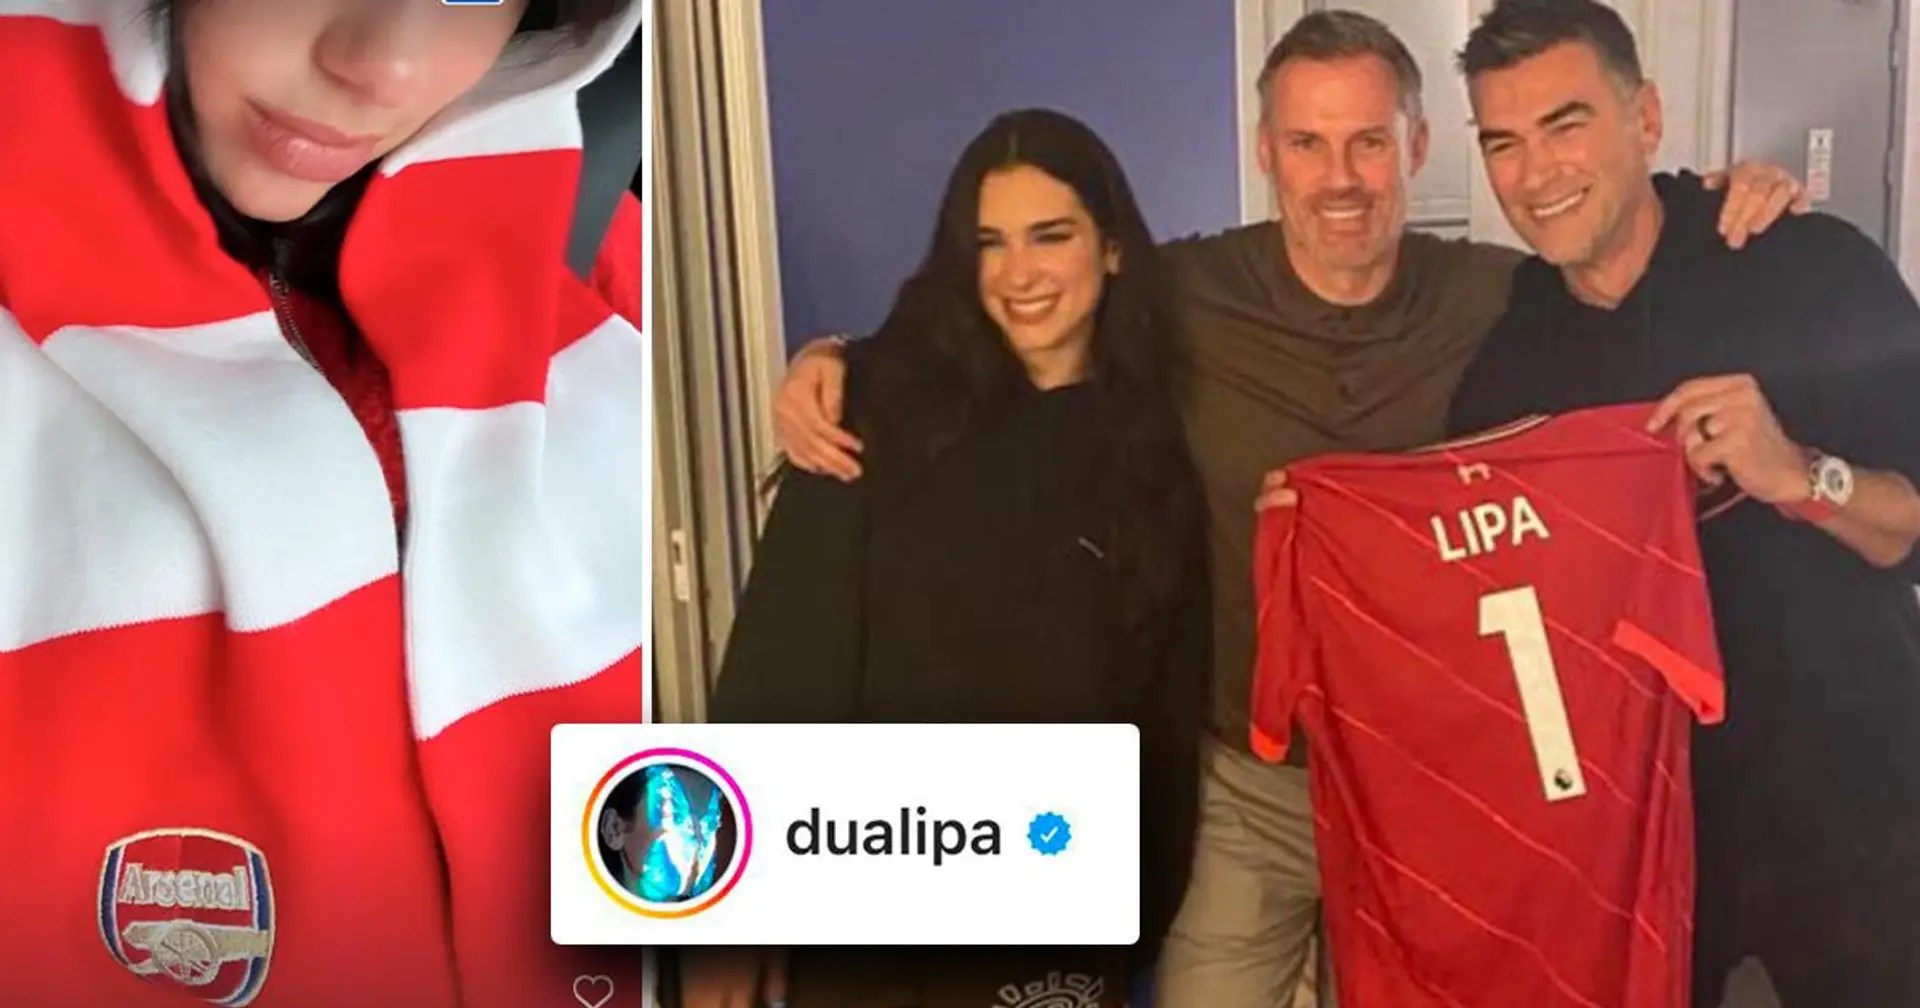 Dua Lipa shows support for Arsenal with scarf after win despite previously declaring affinity for Liverpool